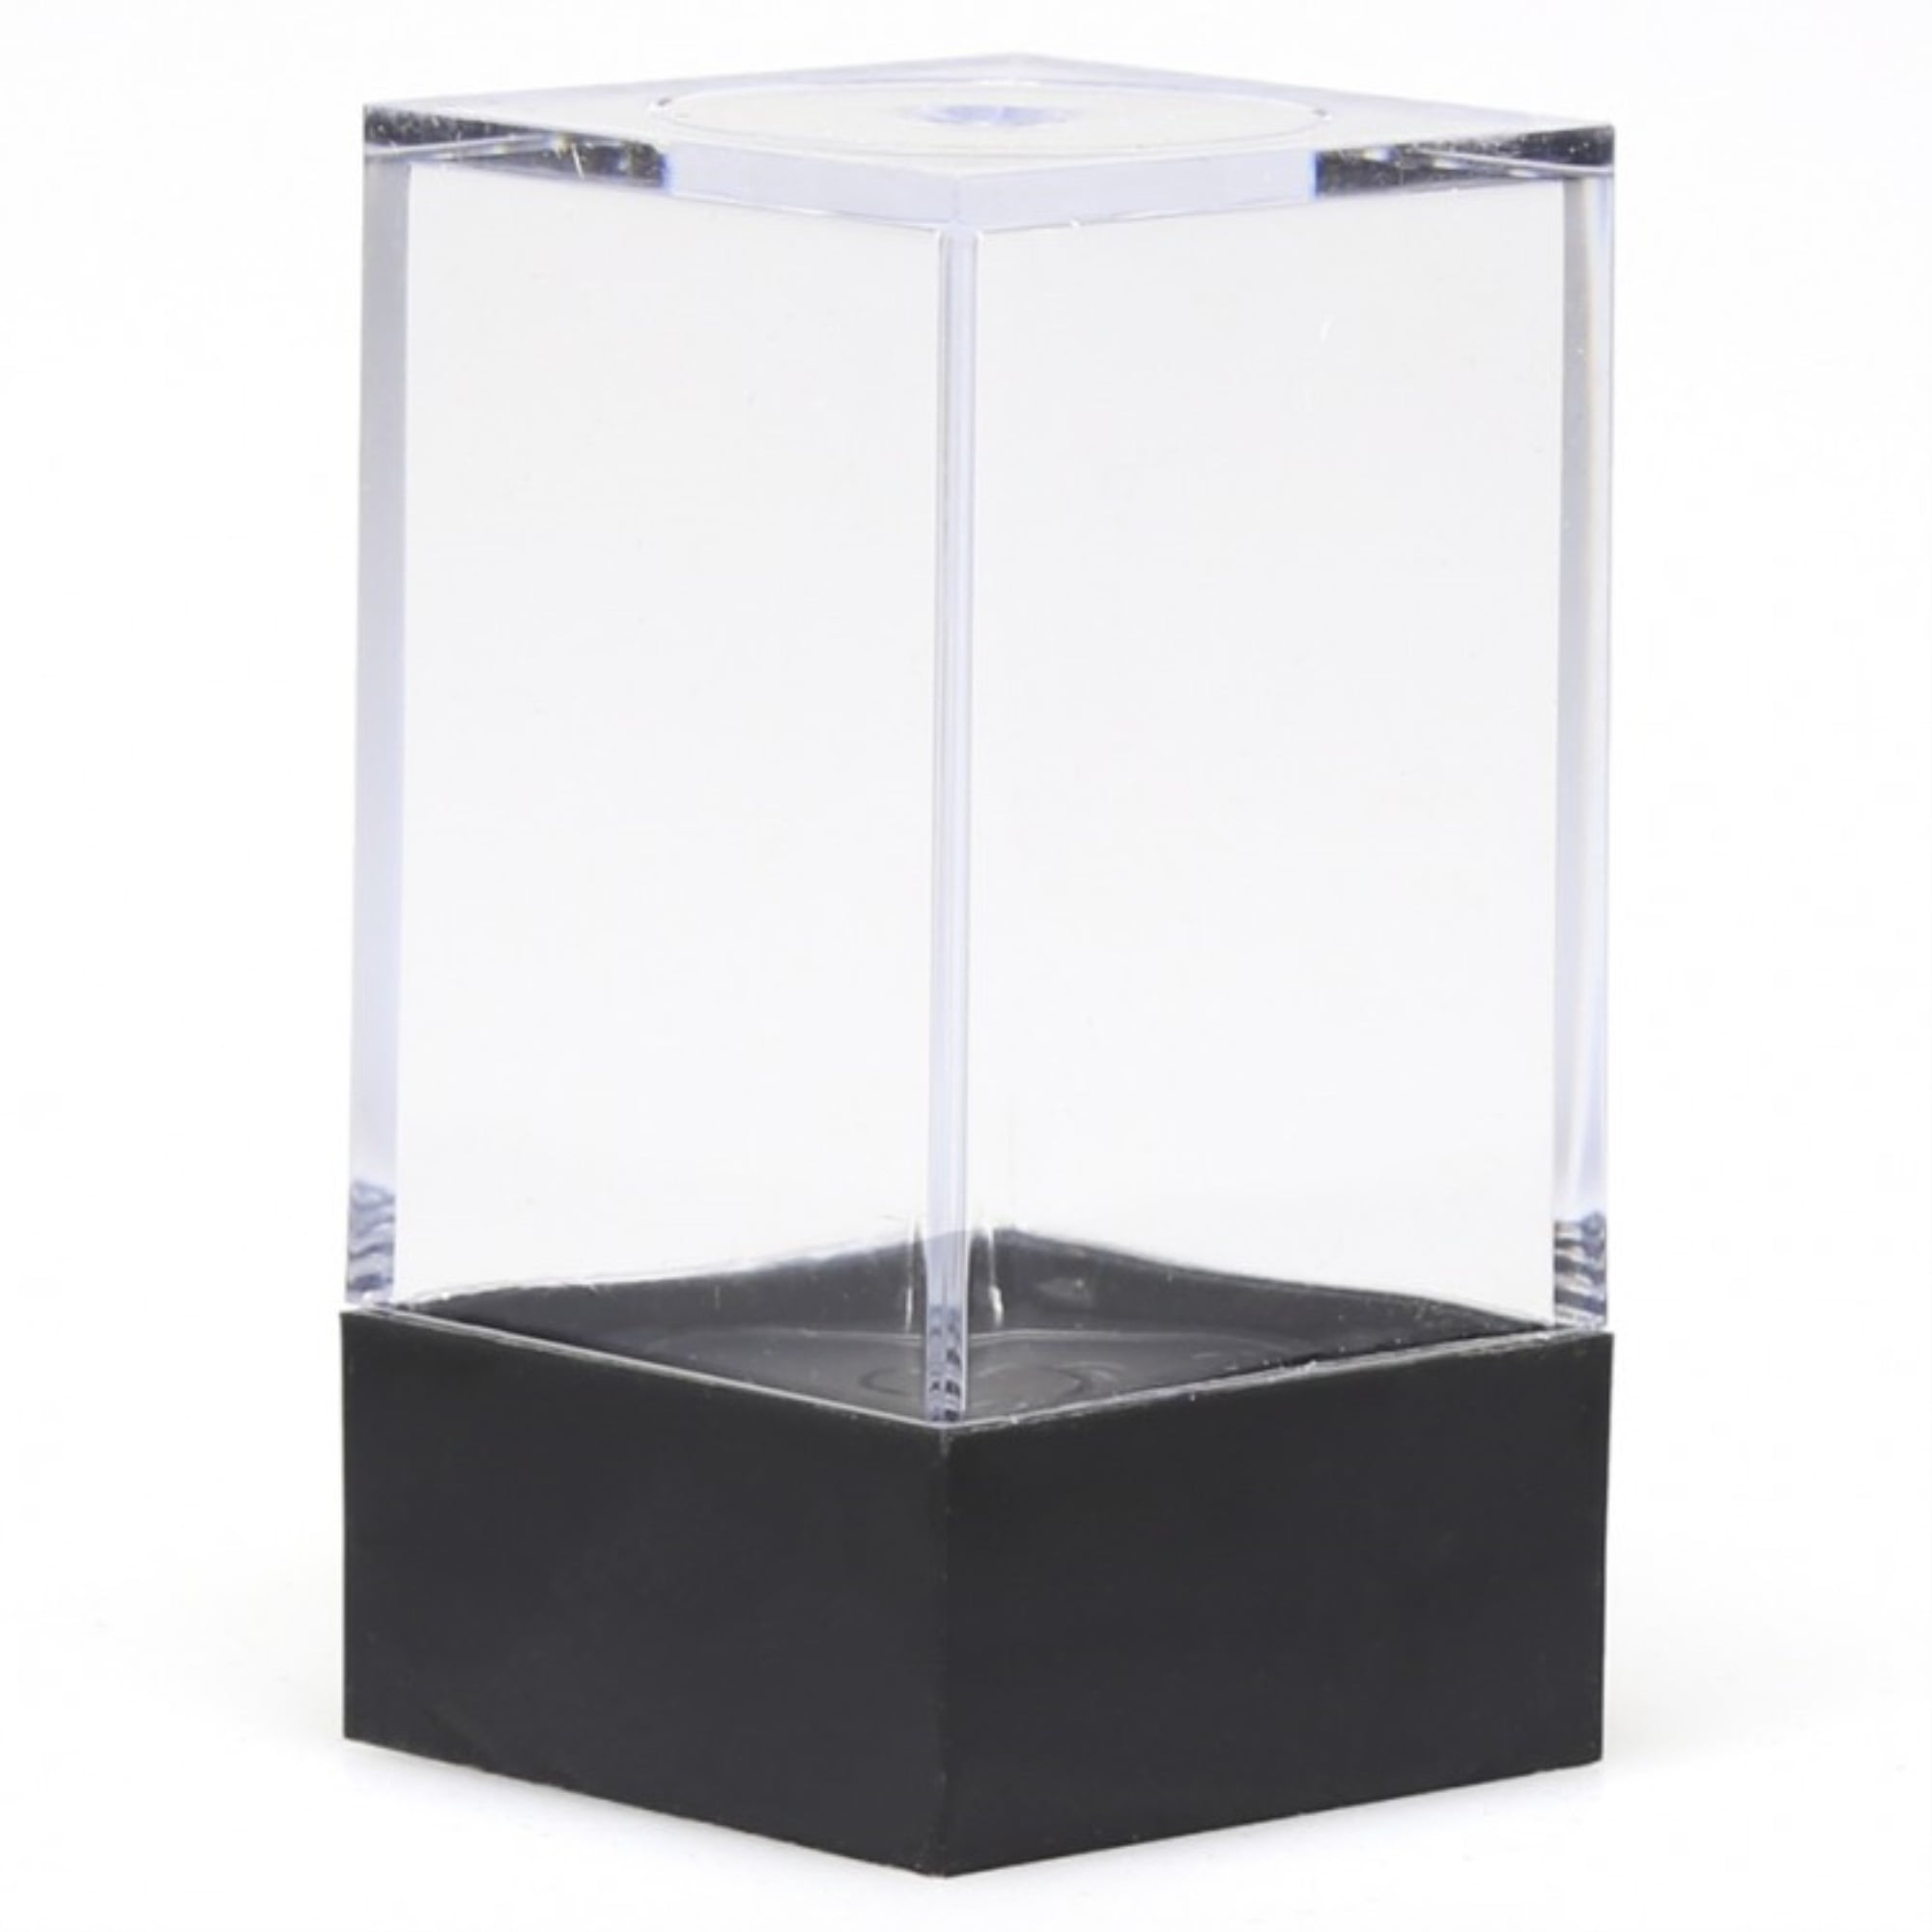 Picture of Chessex CHX02801 Plastic Display Box Figures, Black - Small